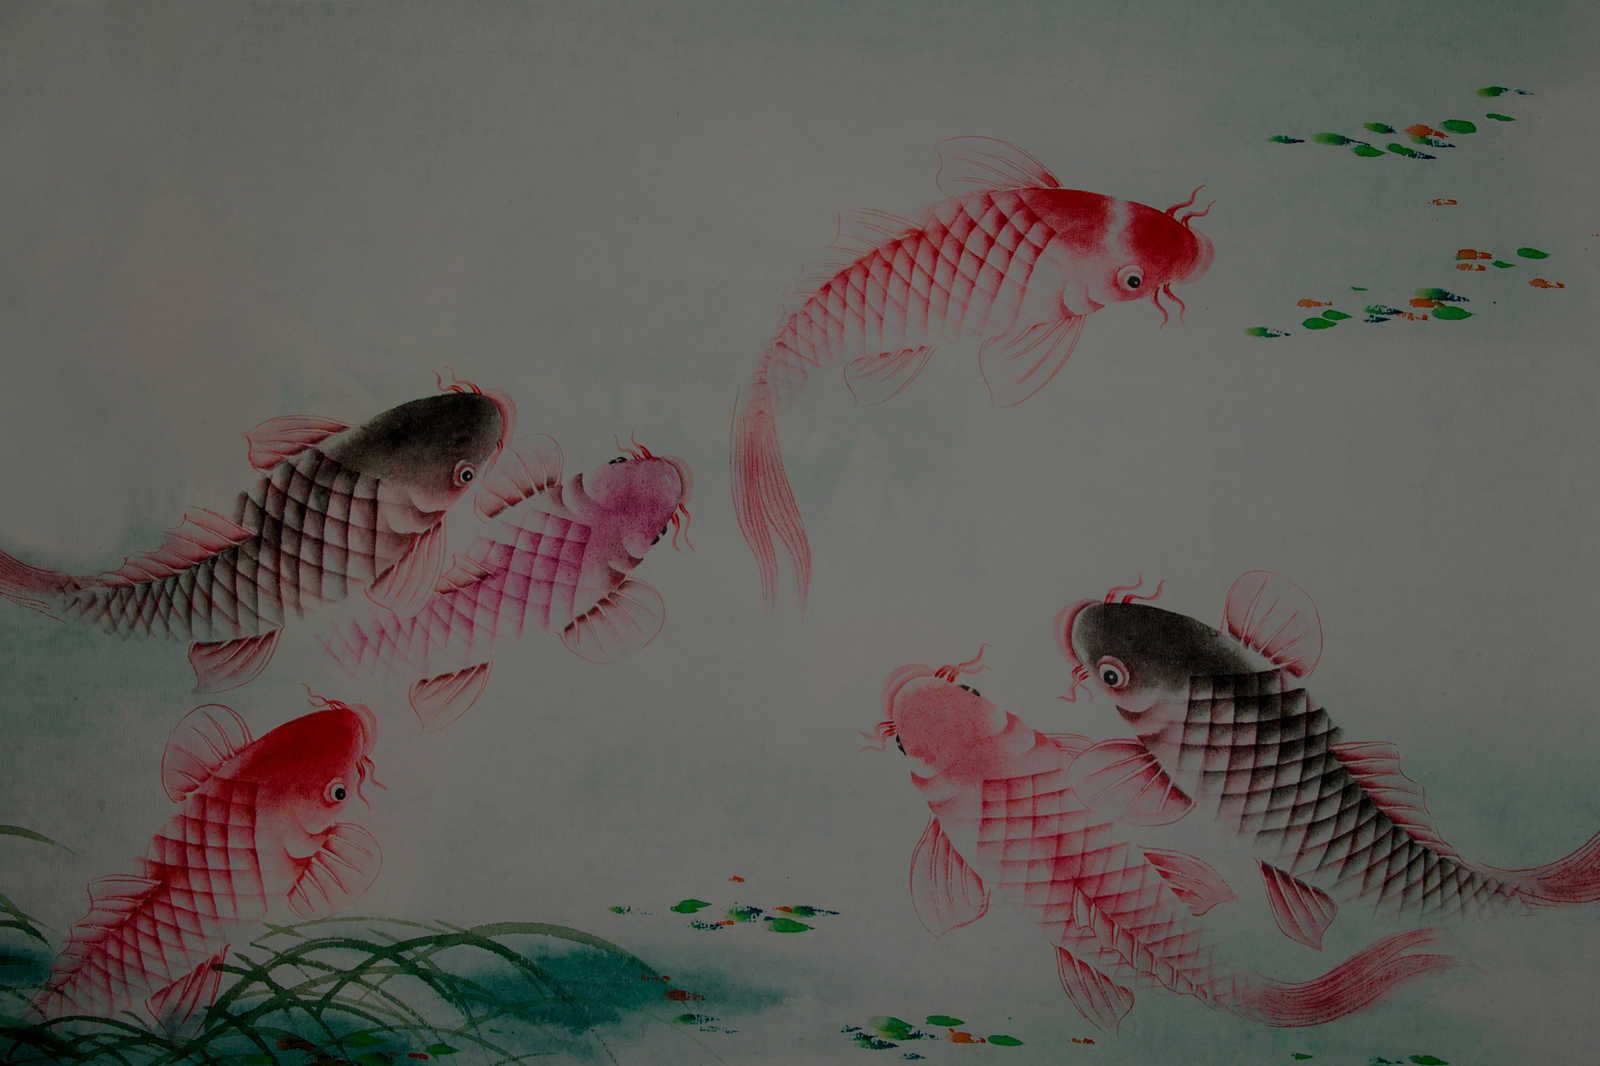             Canvas painting Asia Style with Koi Pond - 1,20 m x 0,80 m
        